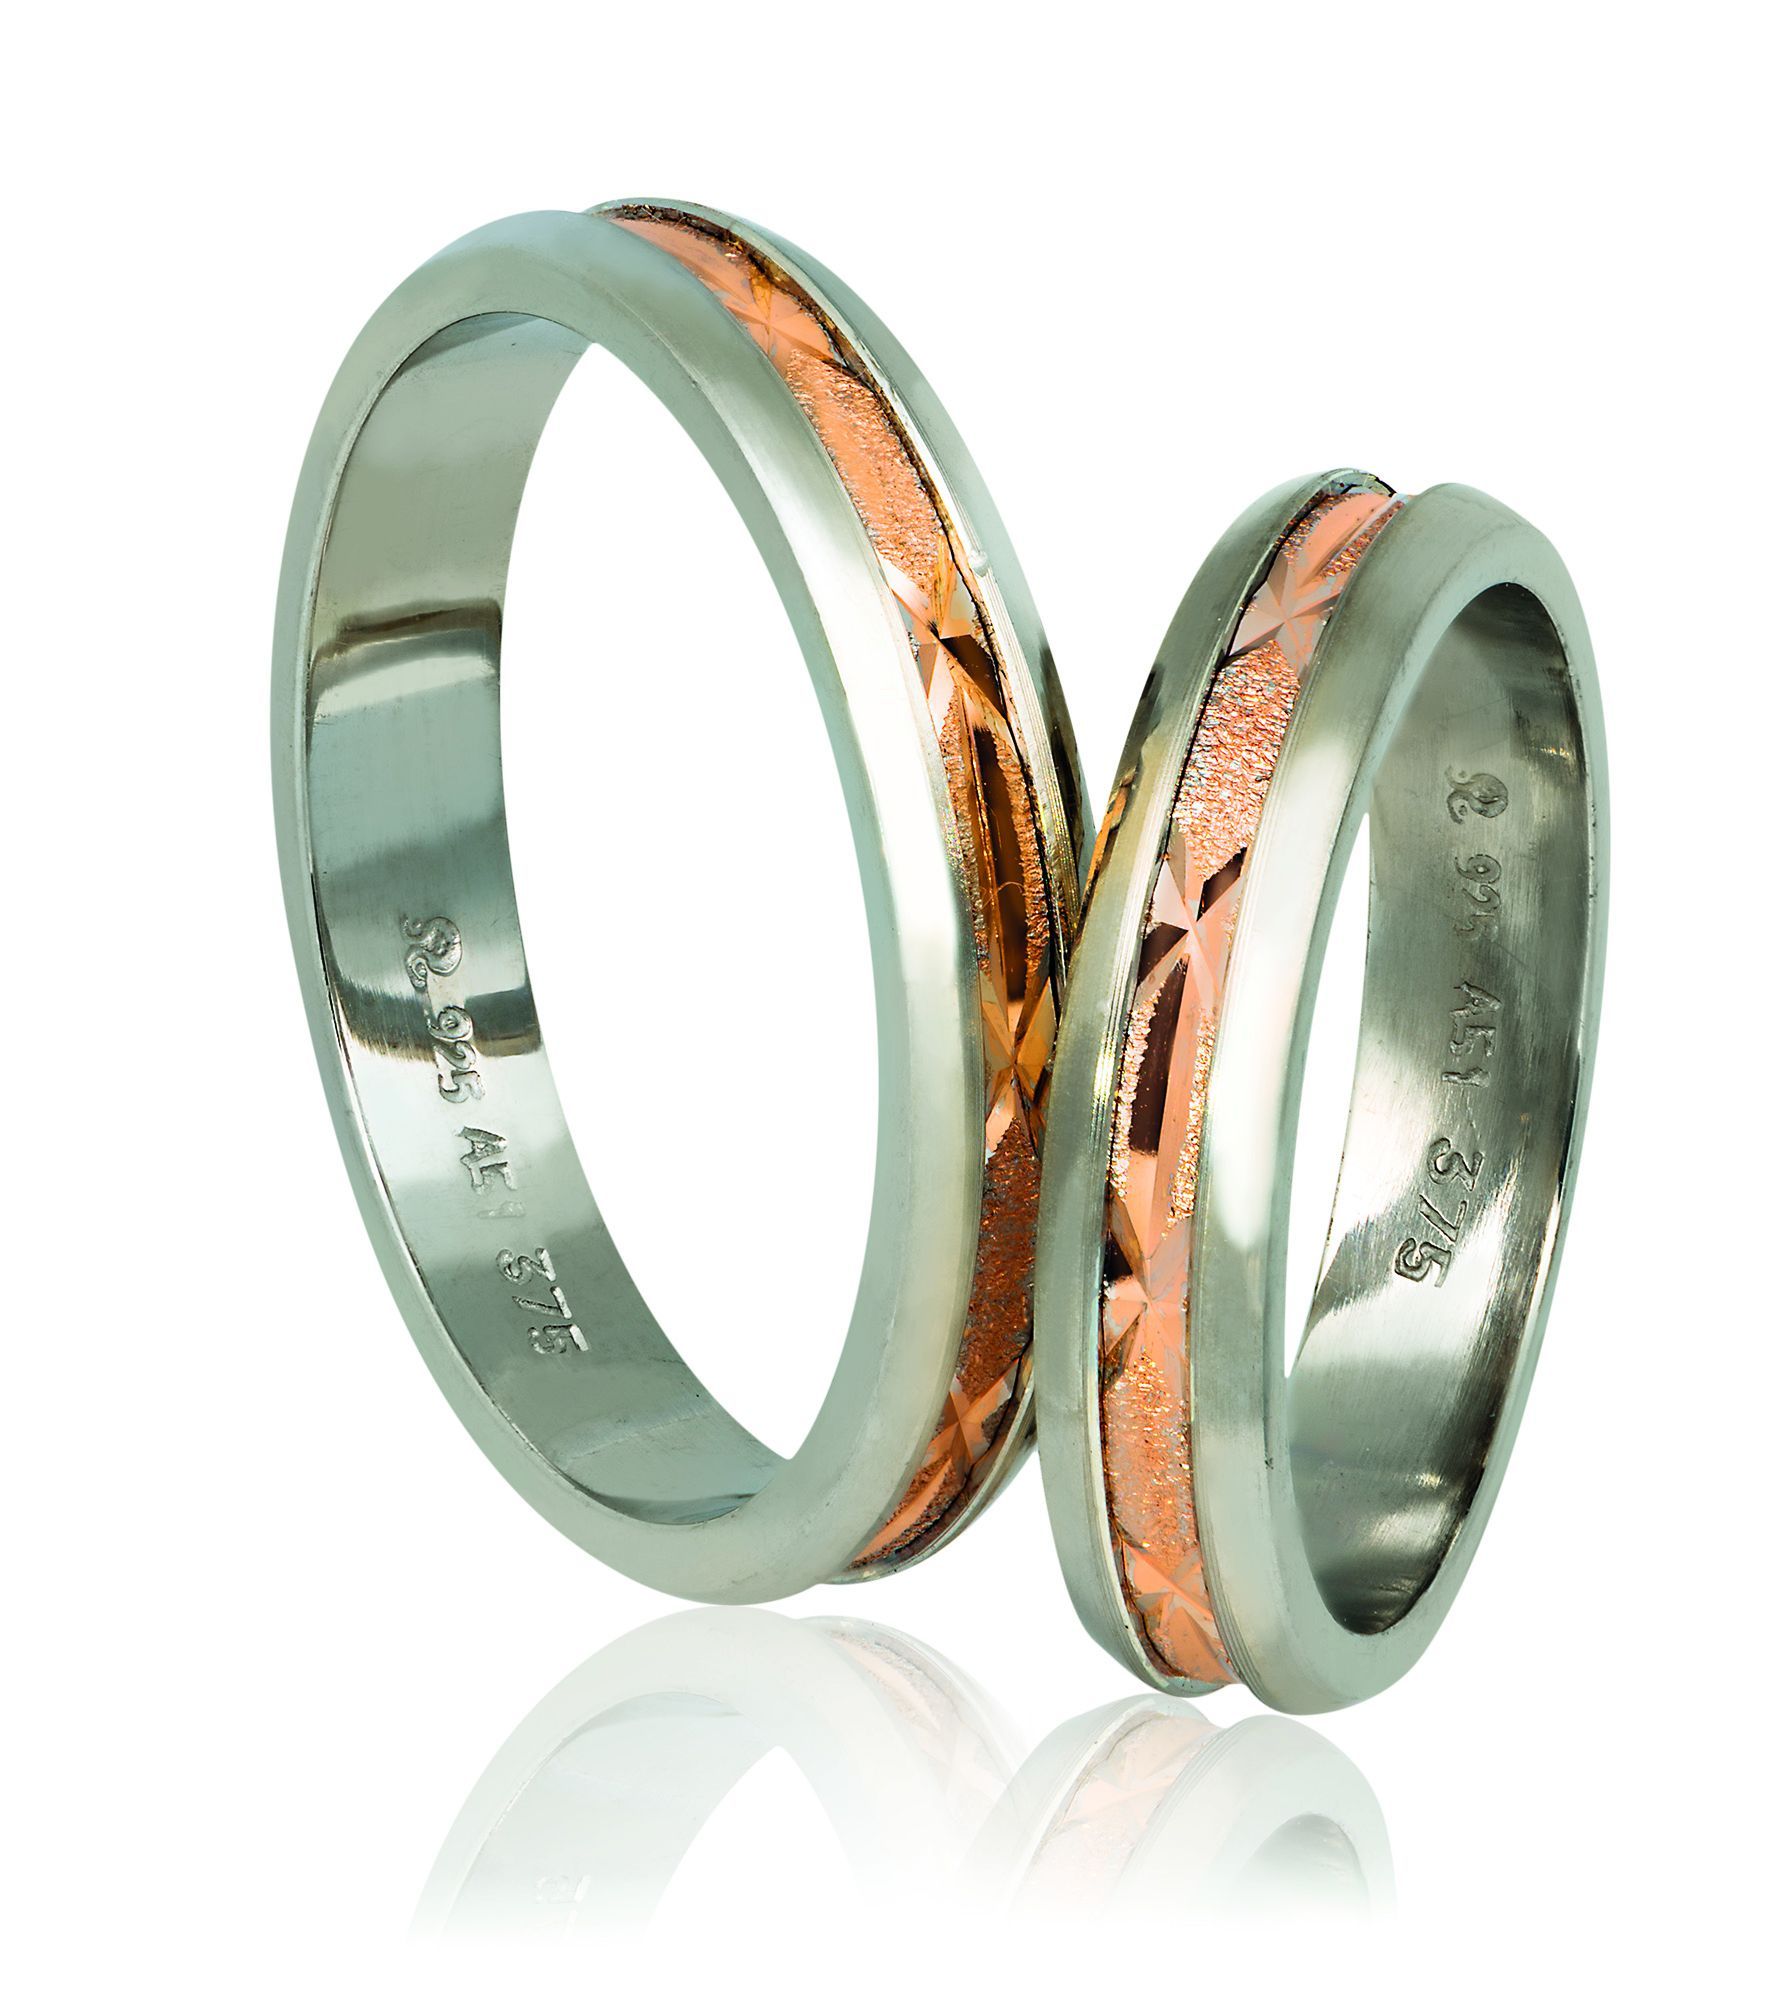 White gold & rose gold wedding rings 4.3mm (code A721r)